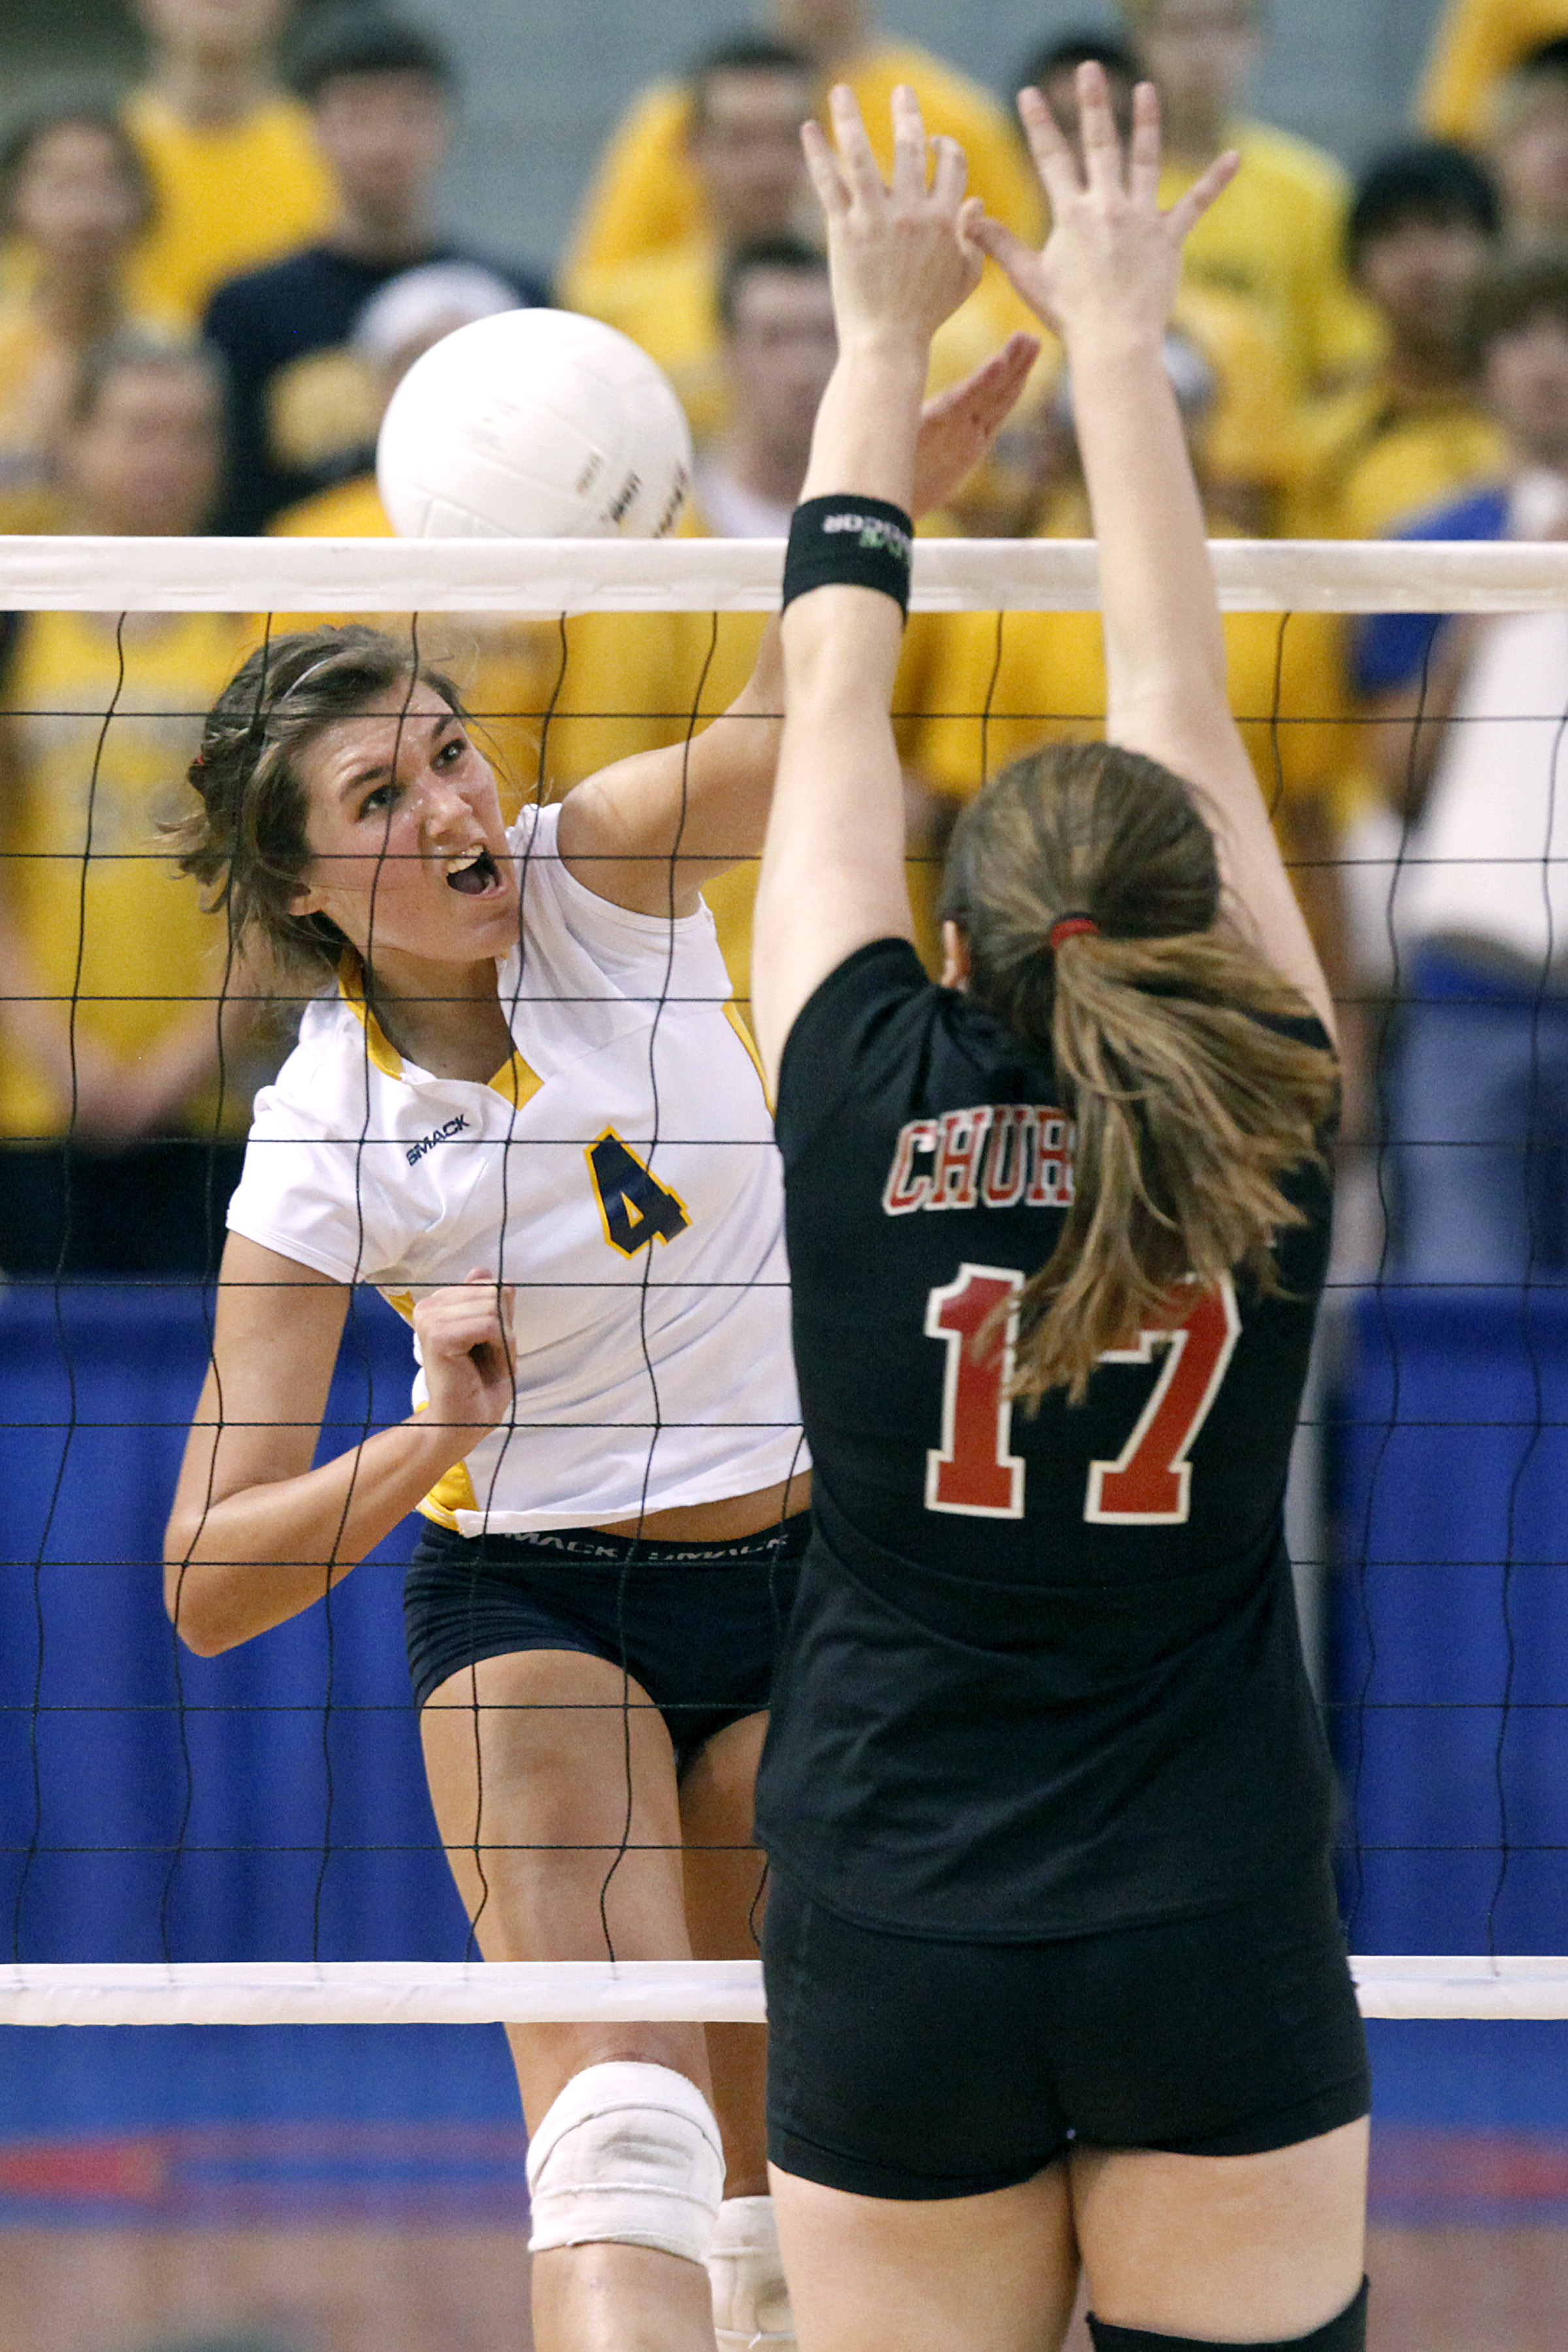 Mallory Patterson strong on the 'weak side' for Portage Central ...